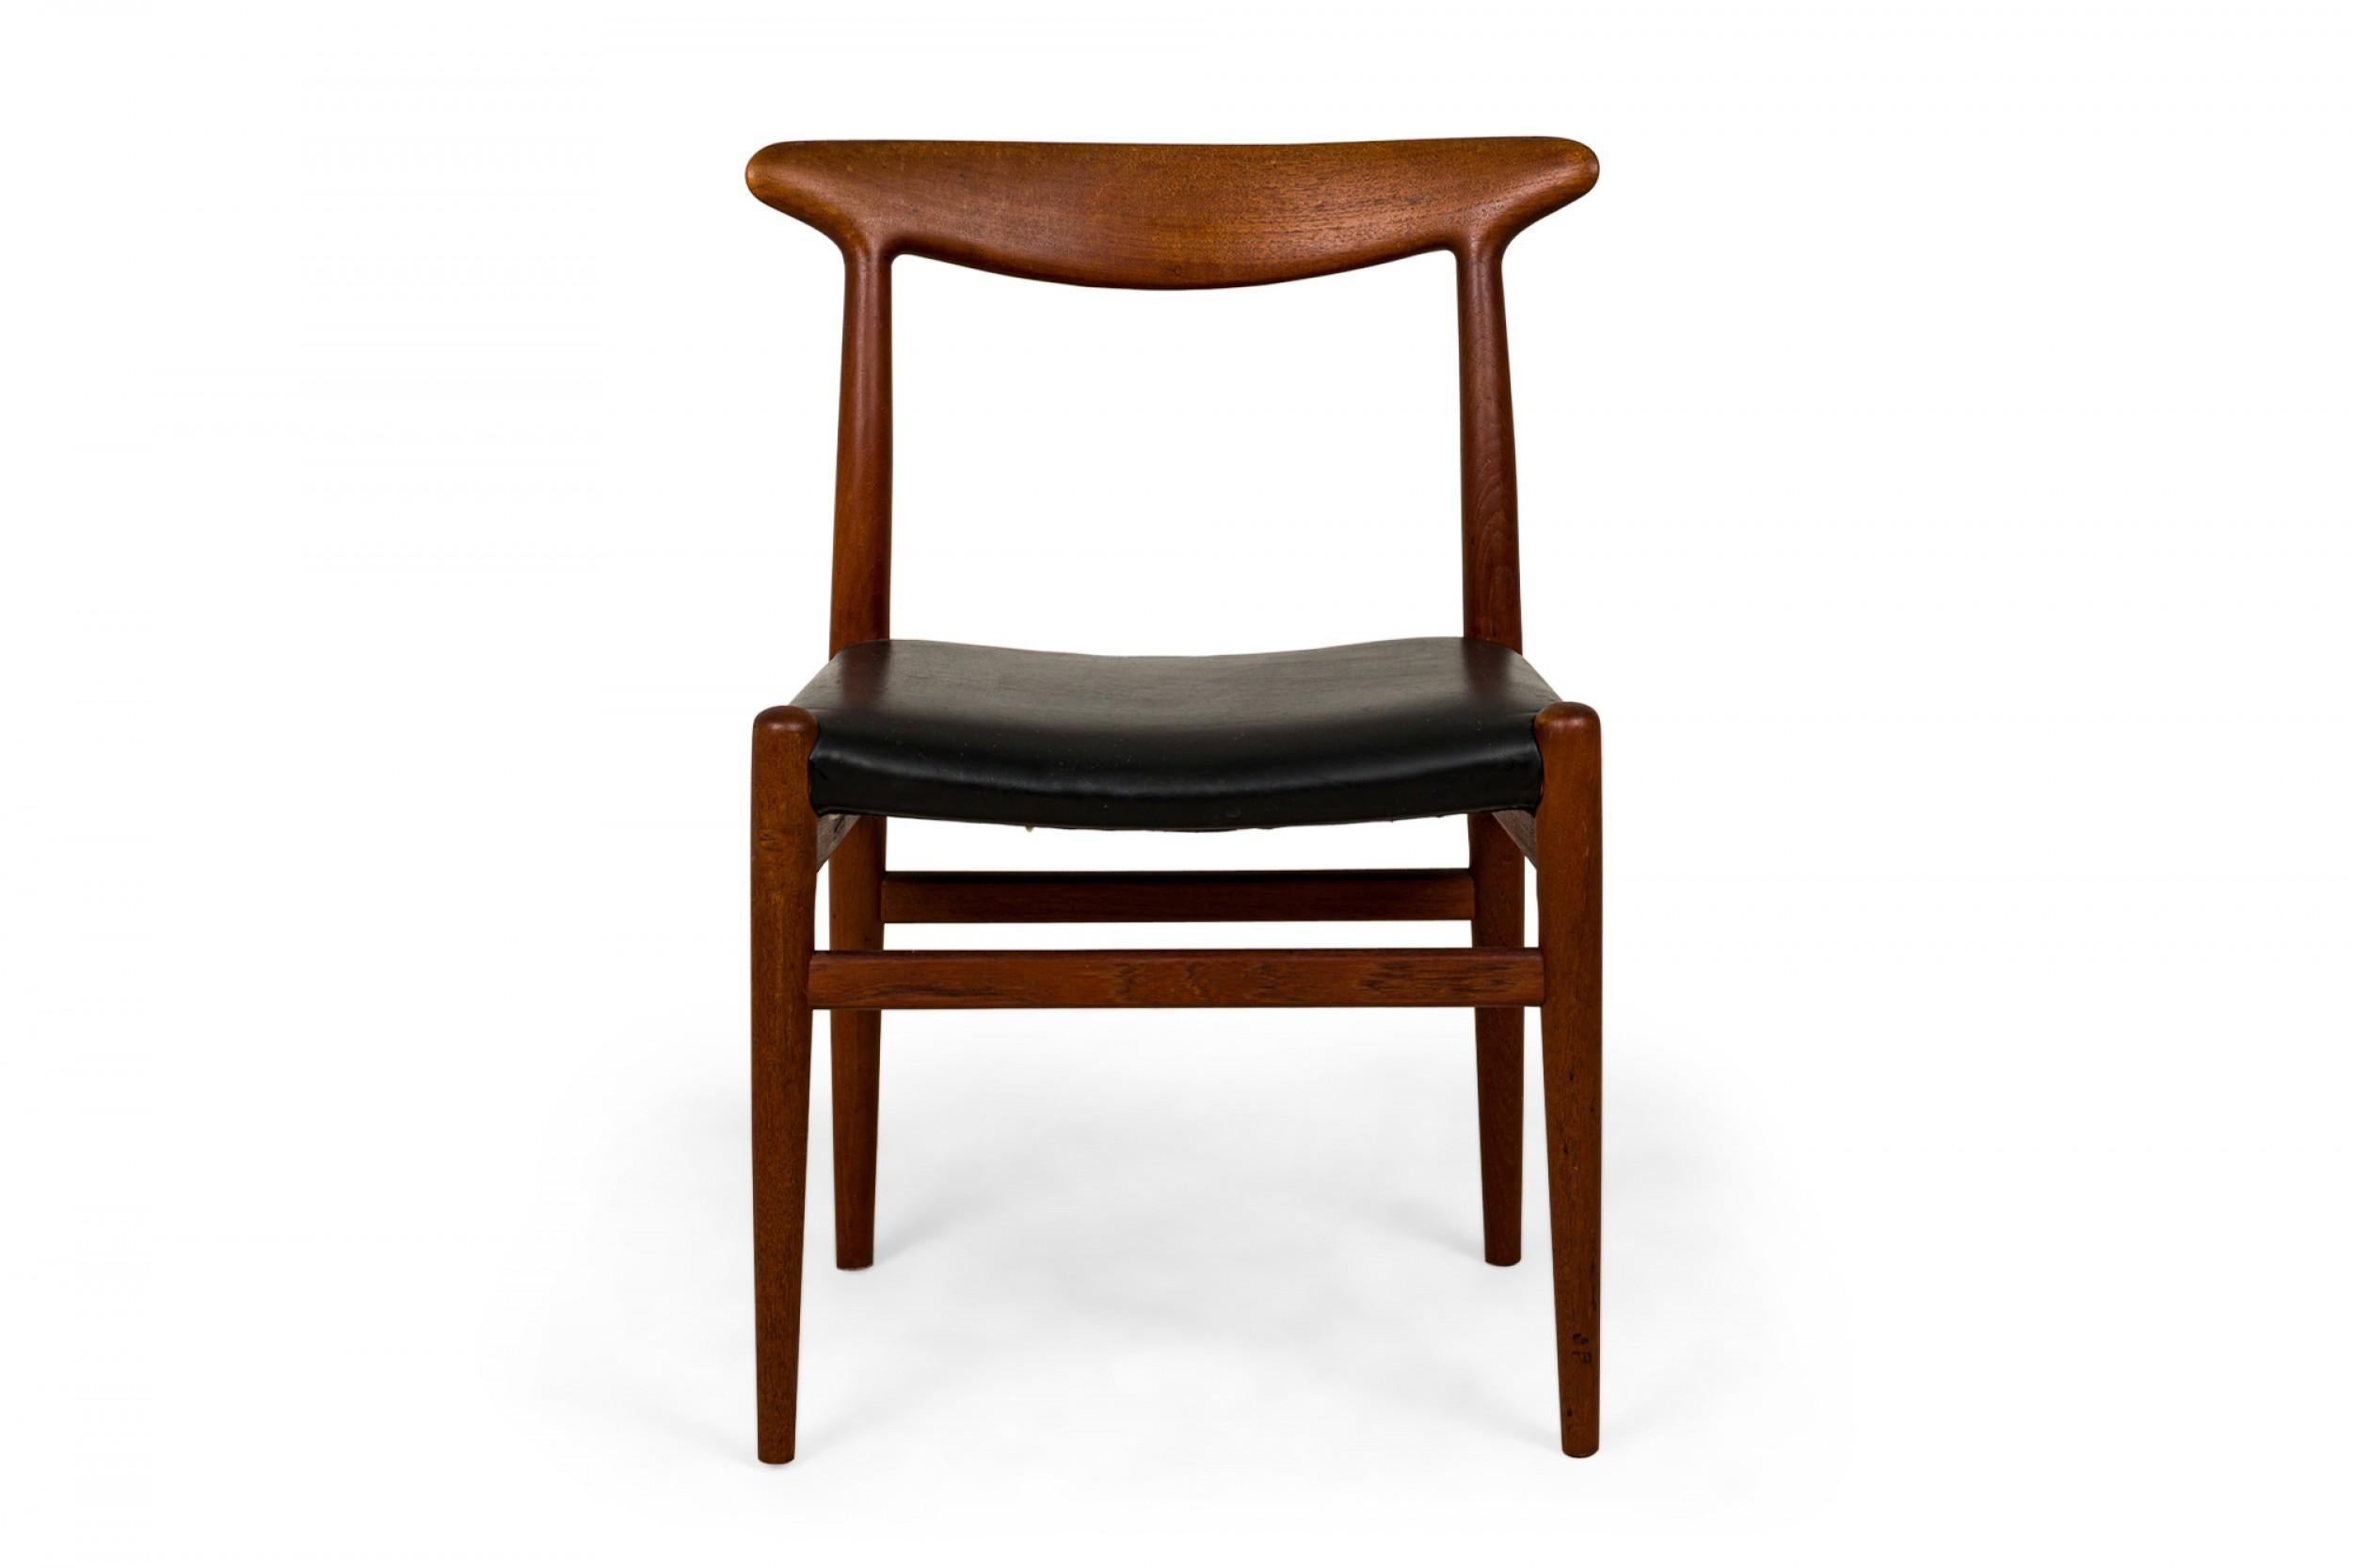 SET of 5 Danish Mid-Century dining side chairs with shaped teak wood frames and black leather upholstered seats, resting on tapered dowel legs with stretchers. (HANS WEGNER FOR C.M. MADSEN)(PRICED AS SET)
